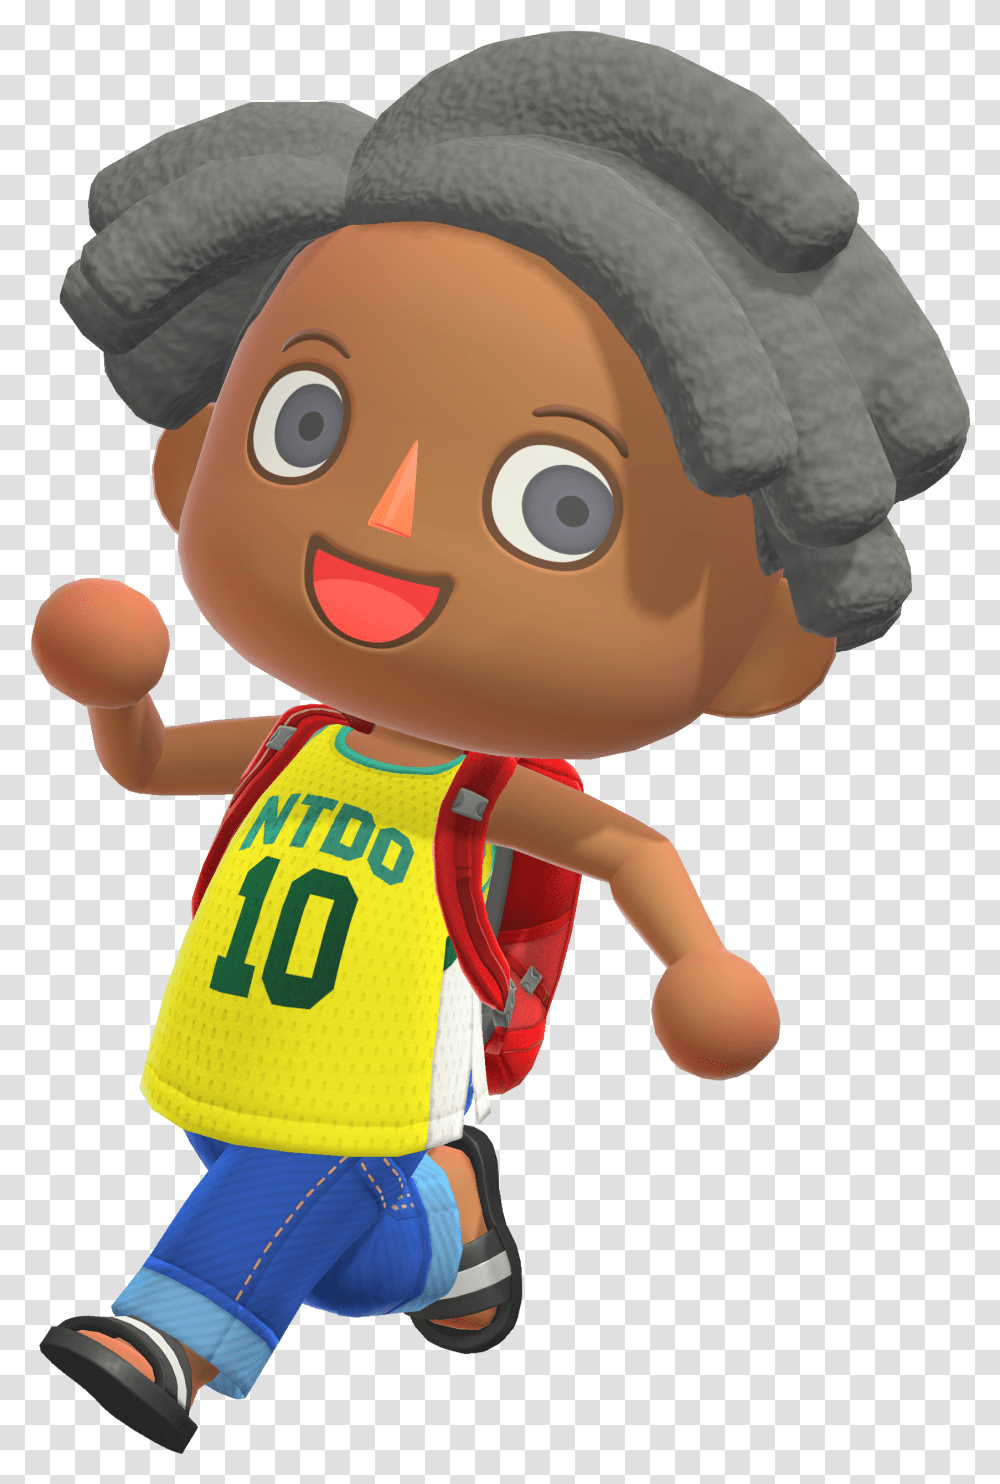 New Hairstyles Bags Flowers Revealed In Amazing Animal Animal Crossing New Horizons Afro, Person, Clothing, People, Hat Transparent Png